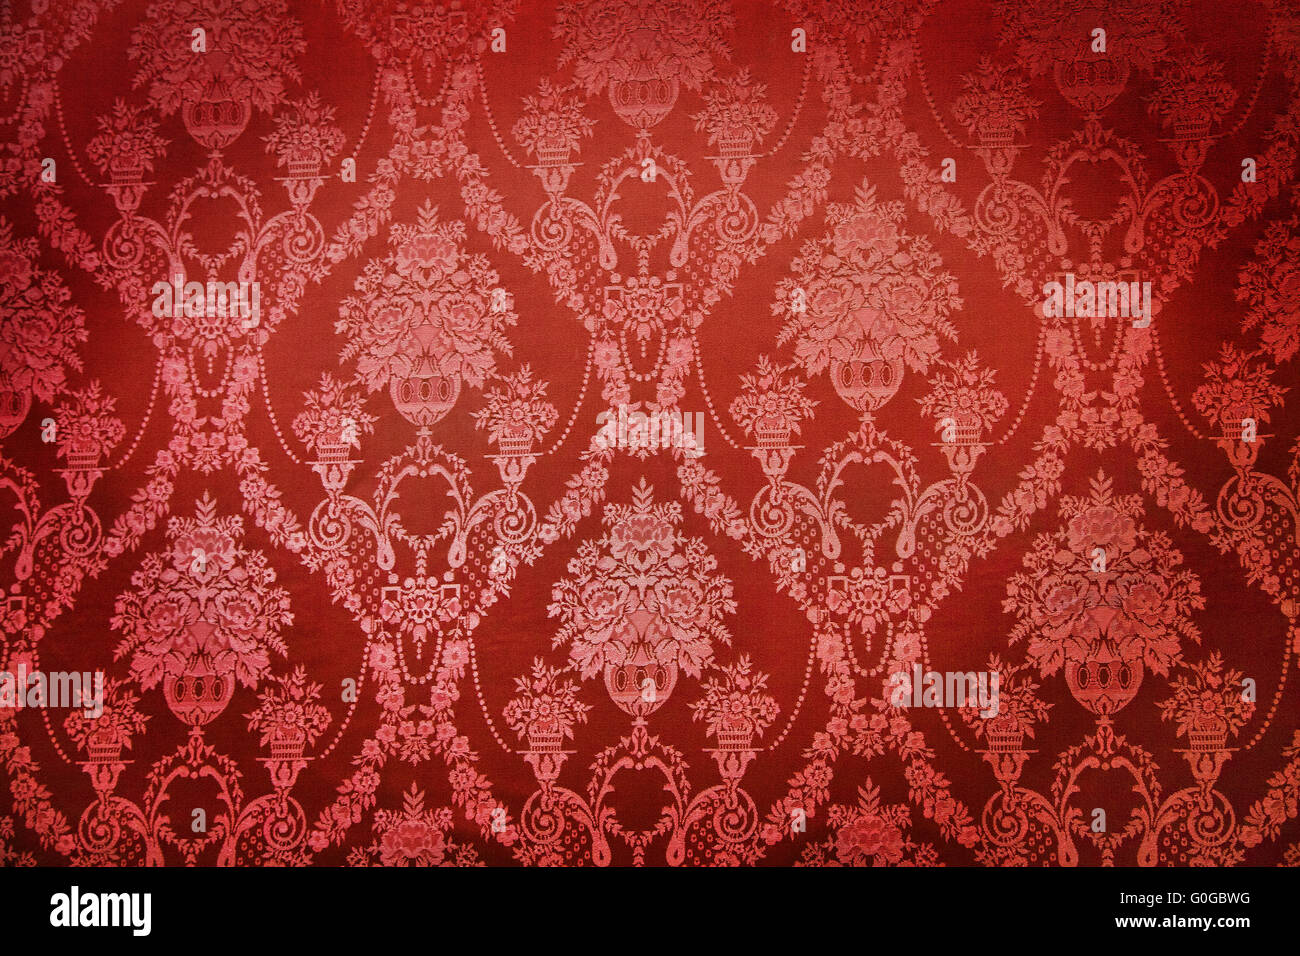 Old textile wall covering Stock Photo